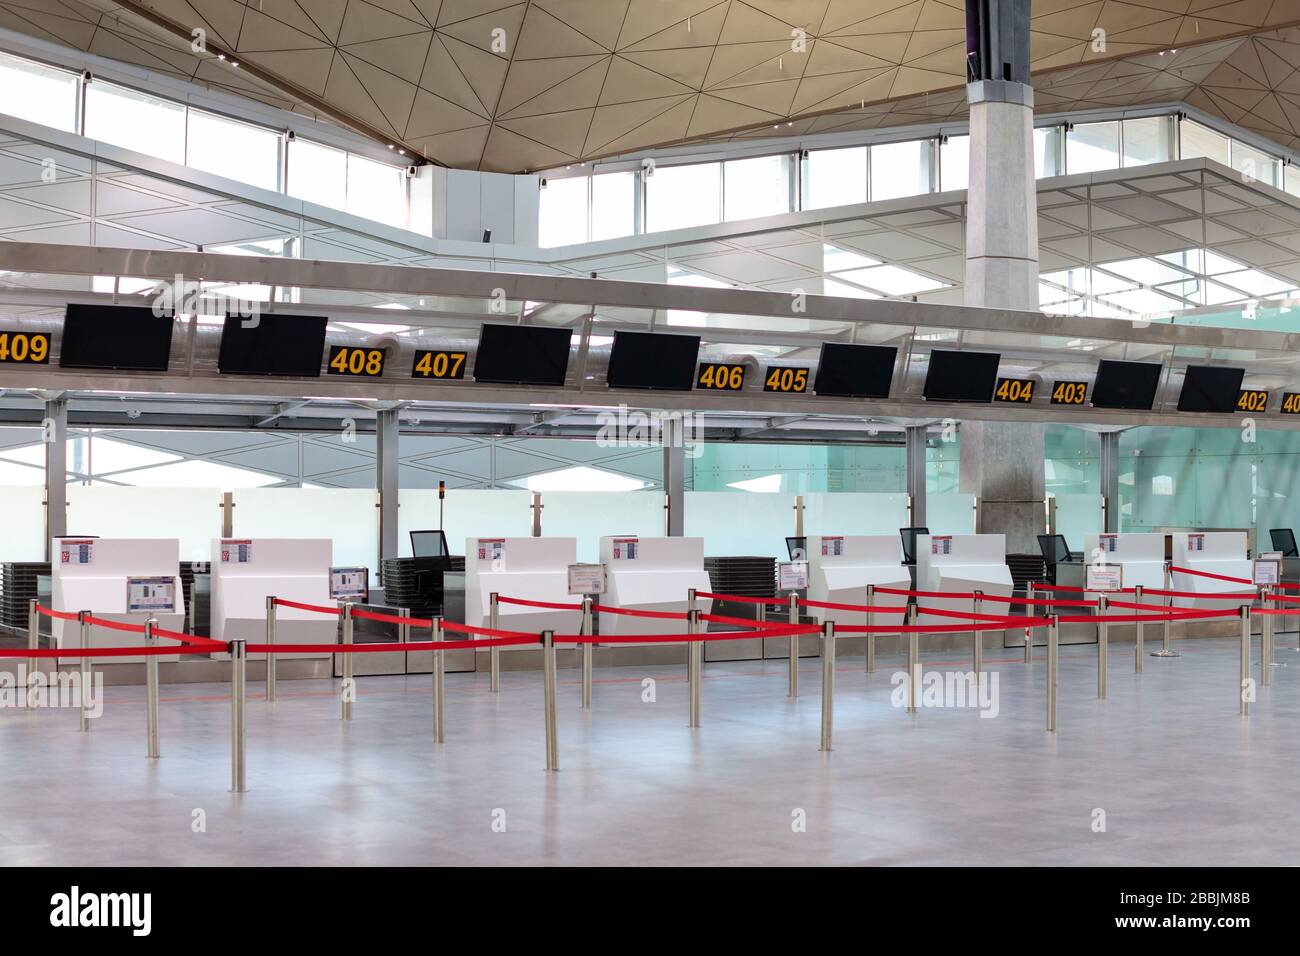 St. Petersburg, Russia – March 27, 2020. Empty check-in counters at Pulkovo airport terminal due to coronavirus pandemic/Covid-19 outbreak Stock Photo